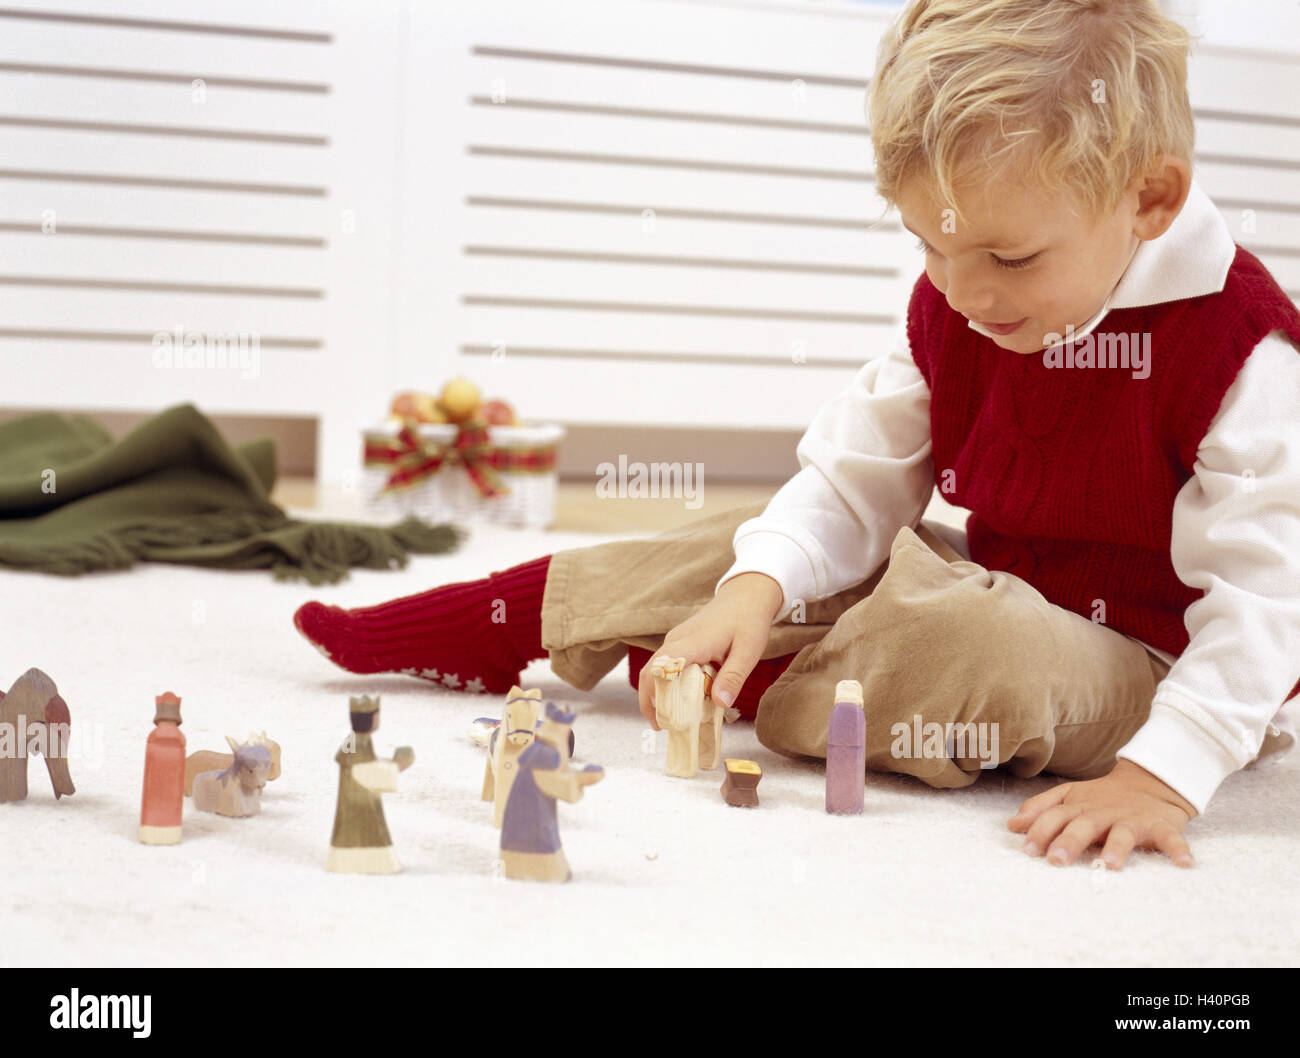 Christmas, floor, boy, nativity figurines, plays, yule tide, Advent season, Advent, child, infant, childhood, lighthearted, natural, characters, Wooden characters, game, activity, inside, for Christmas, prejoy Stock Photo